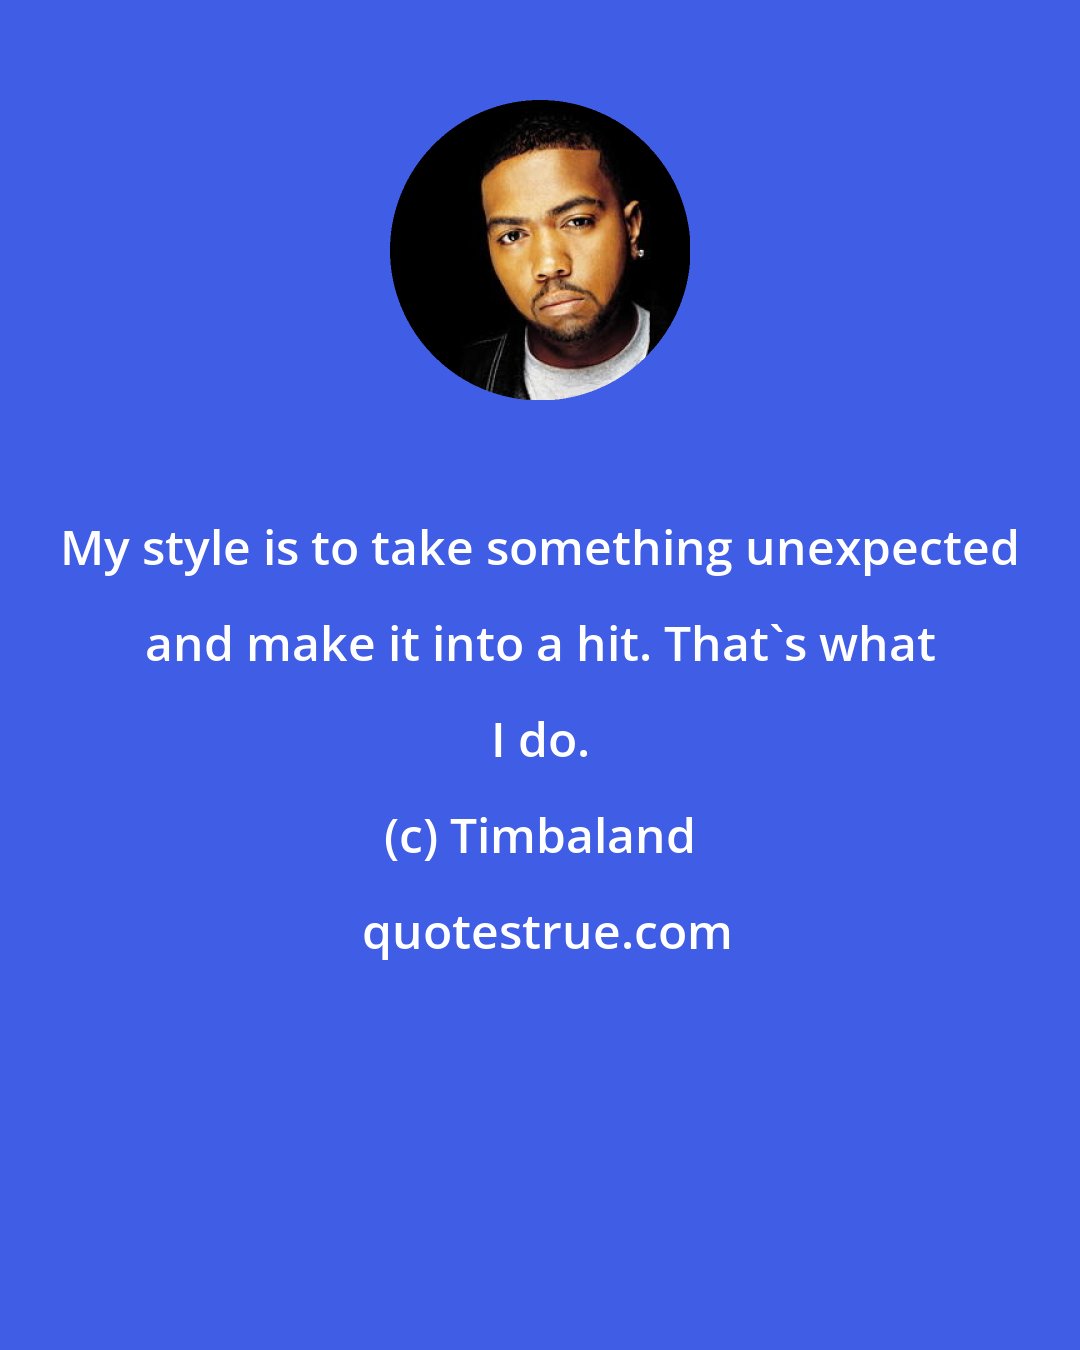 Timbaland: My style is to take something unexpected and make it into a hit. That's what I do.